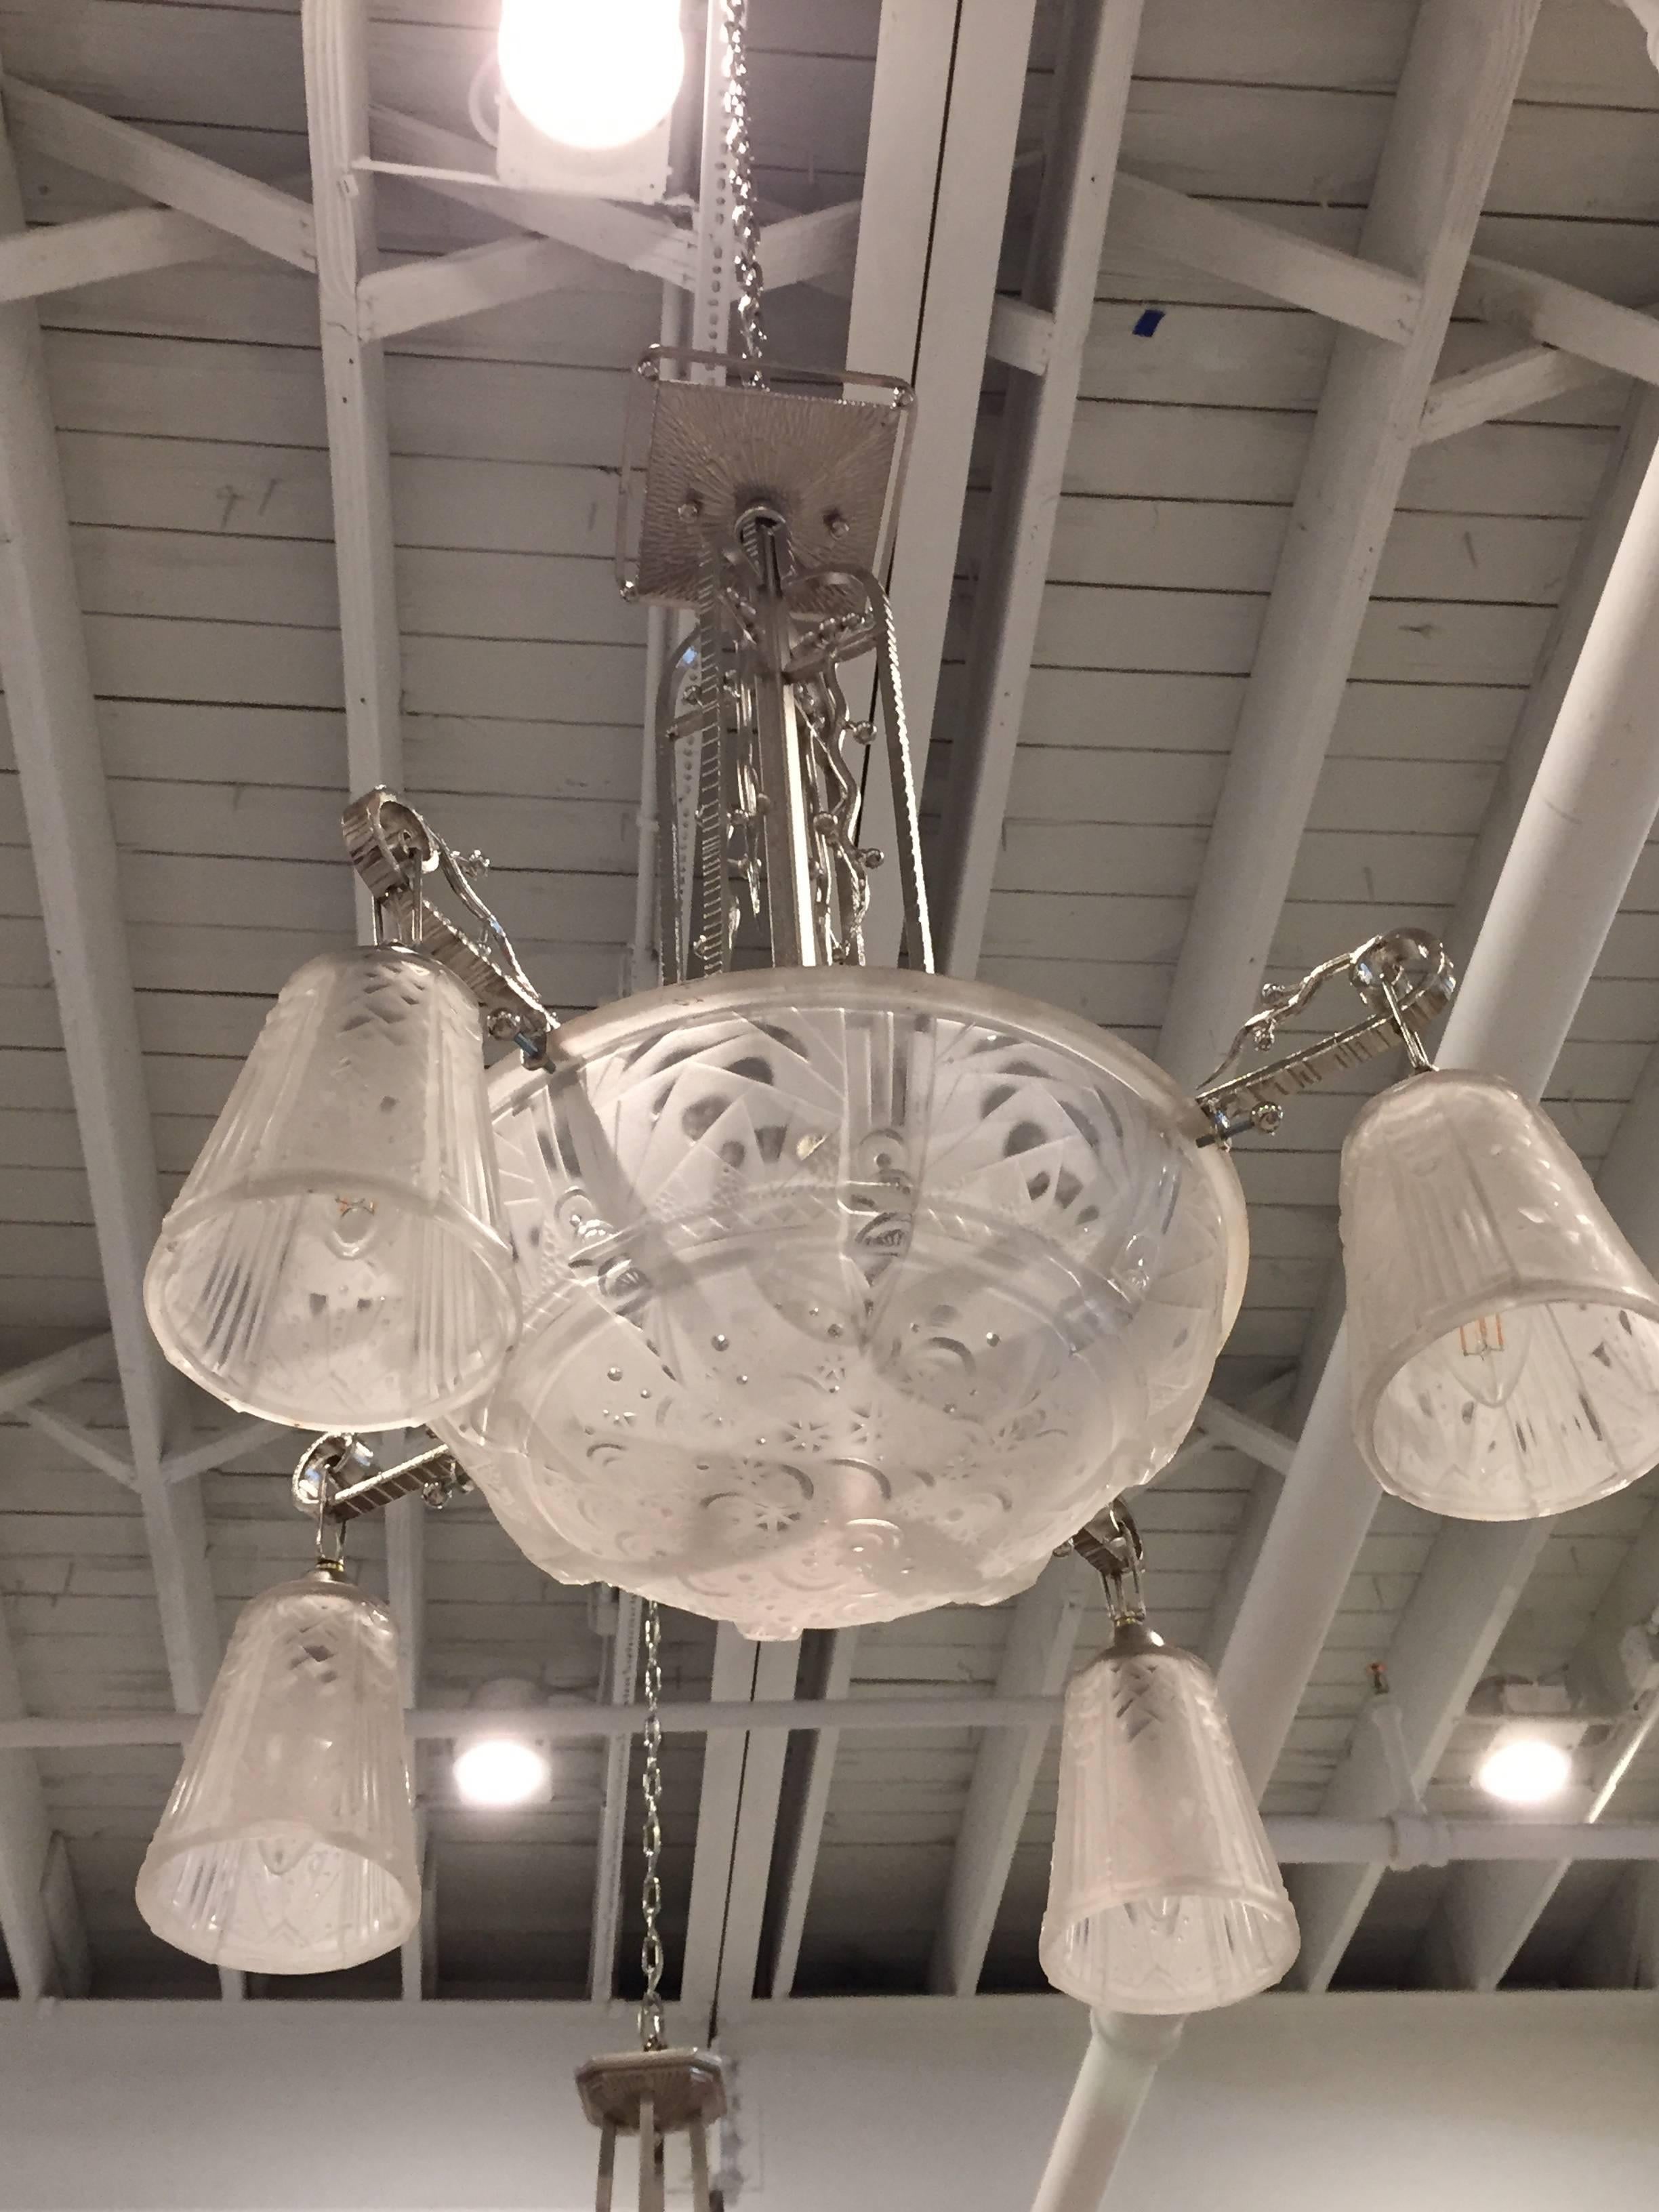 French Art Deco chandelier signed by Muller Frères with four tulips surrounding the center globe. Beautiful geometrical and floral motif. Every piece of glass is signed Muller Frères. The frame has been plated in polished nickel and re wired for